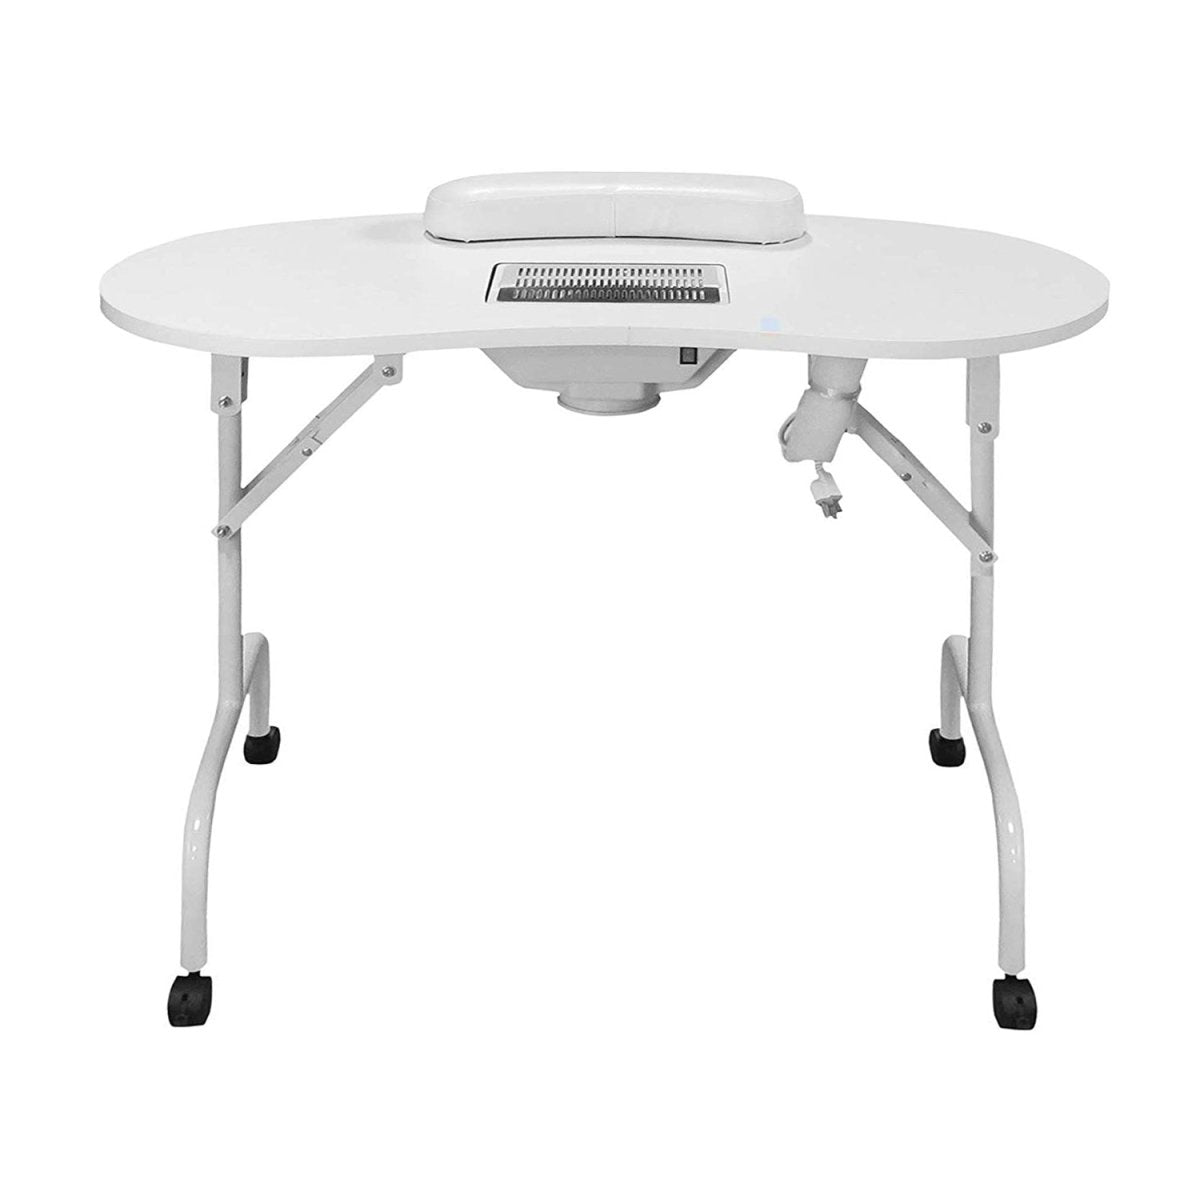 Portable Manicure Table w/ Dust Extractor & Carrying Bag-MT421 - GreenLife-Manicure Table